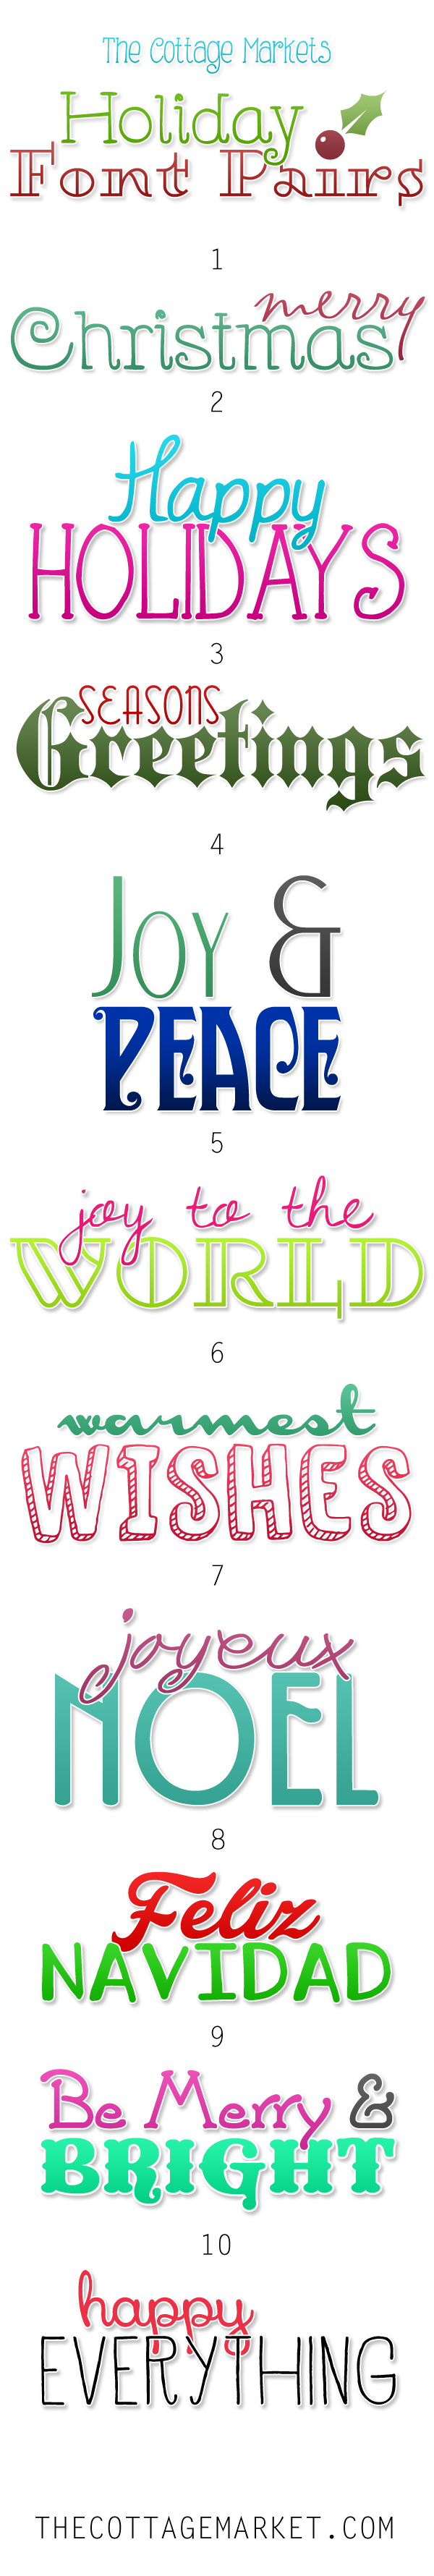 http://thecottagemarket.com/wp-content/uploads/2014/11/TheCottageMarket-HolidayFontPairs-2014-Tower-1.png